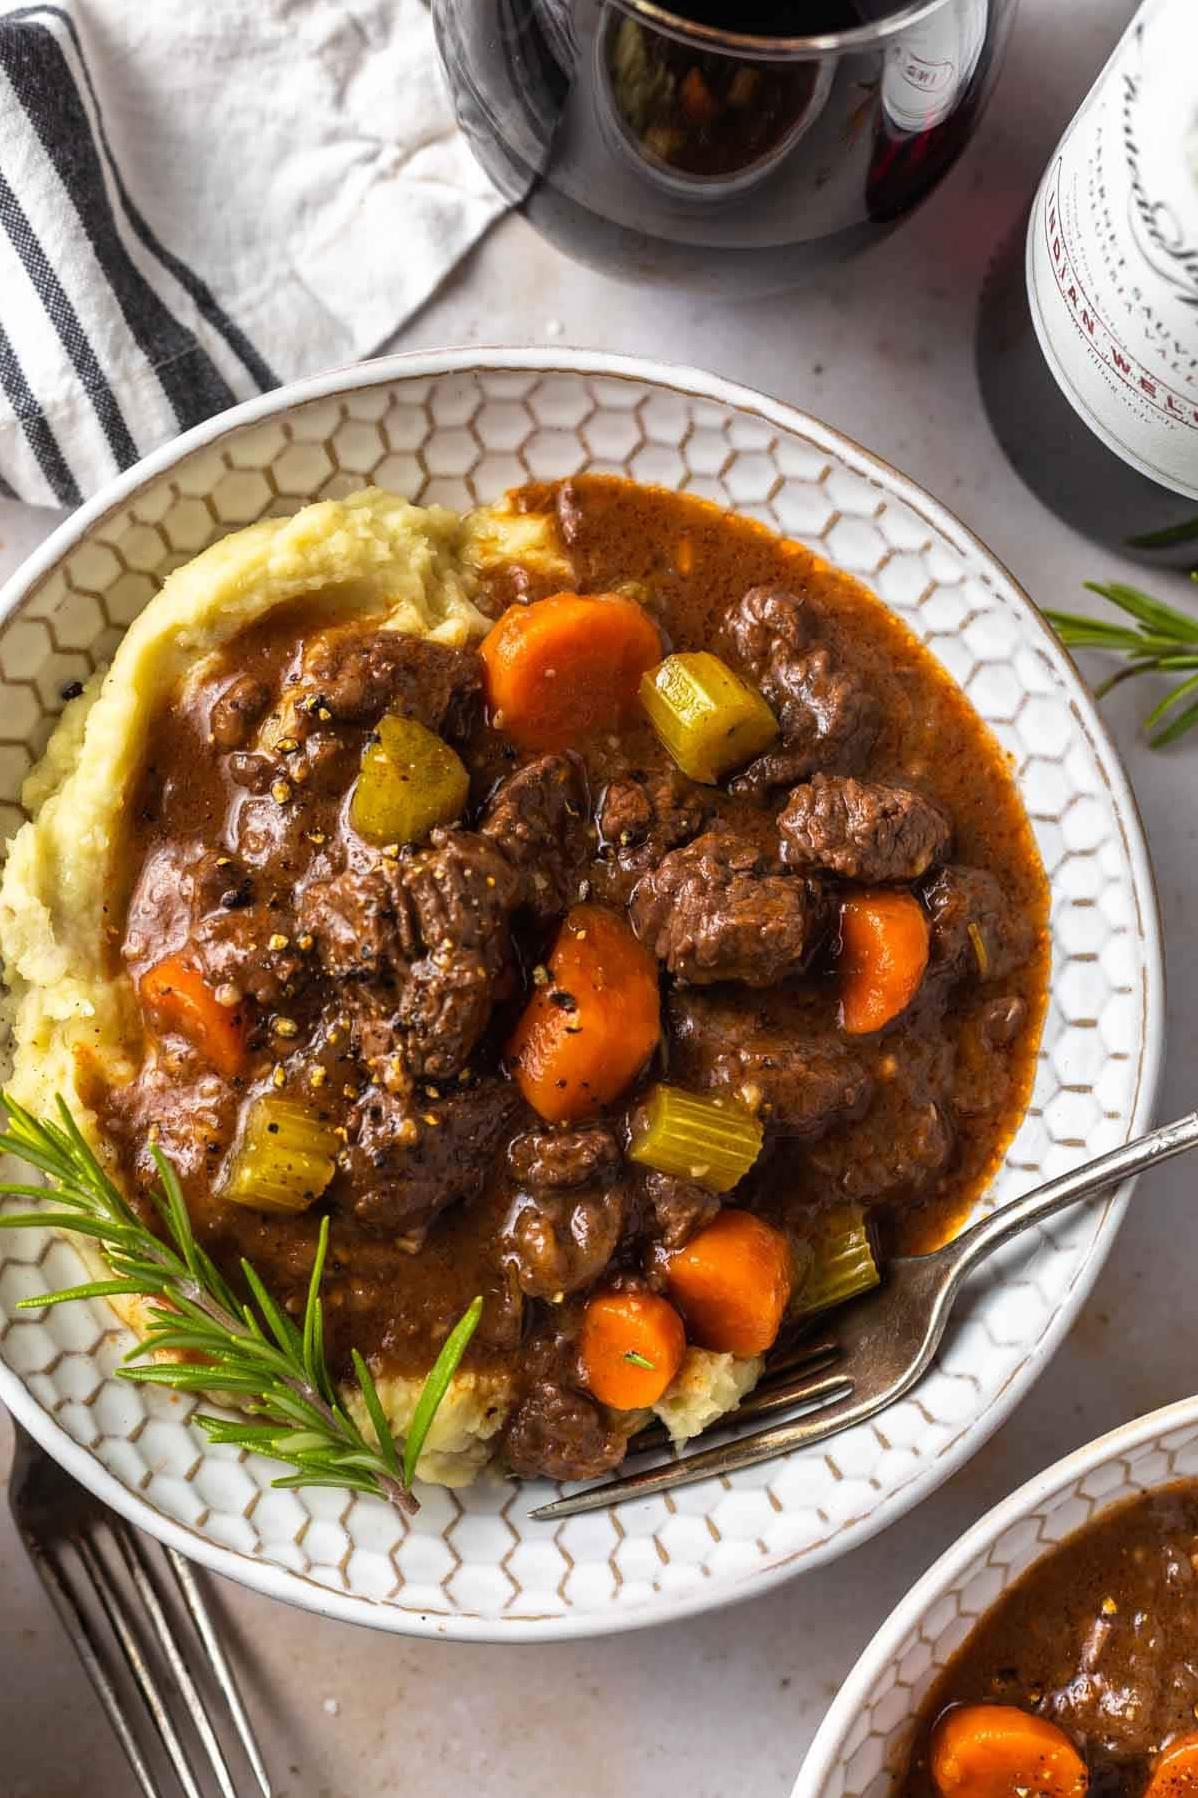  Red wine and beef, a match made in culinary heaven